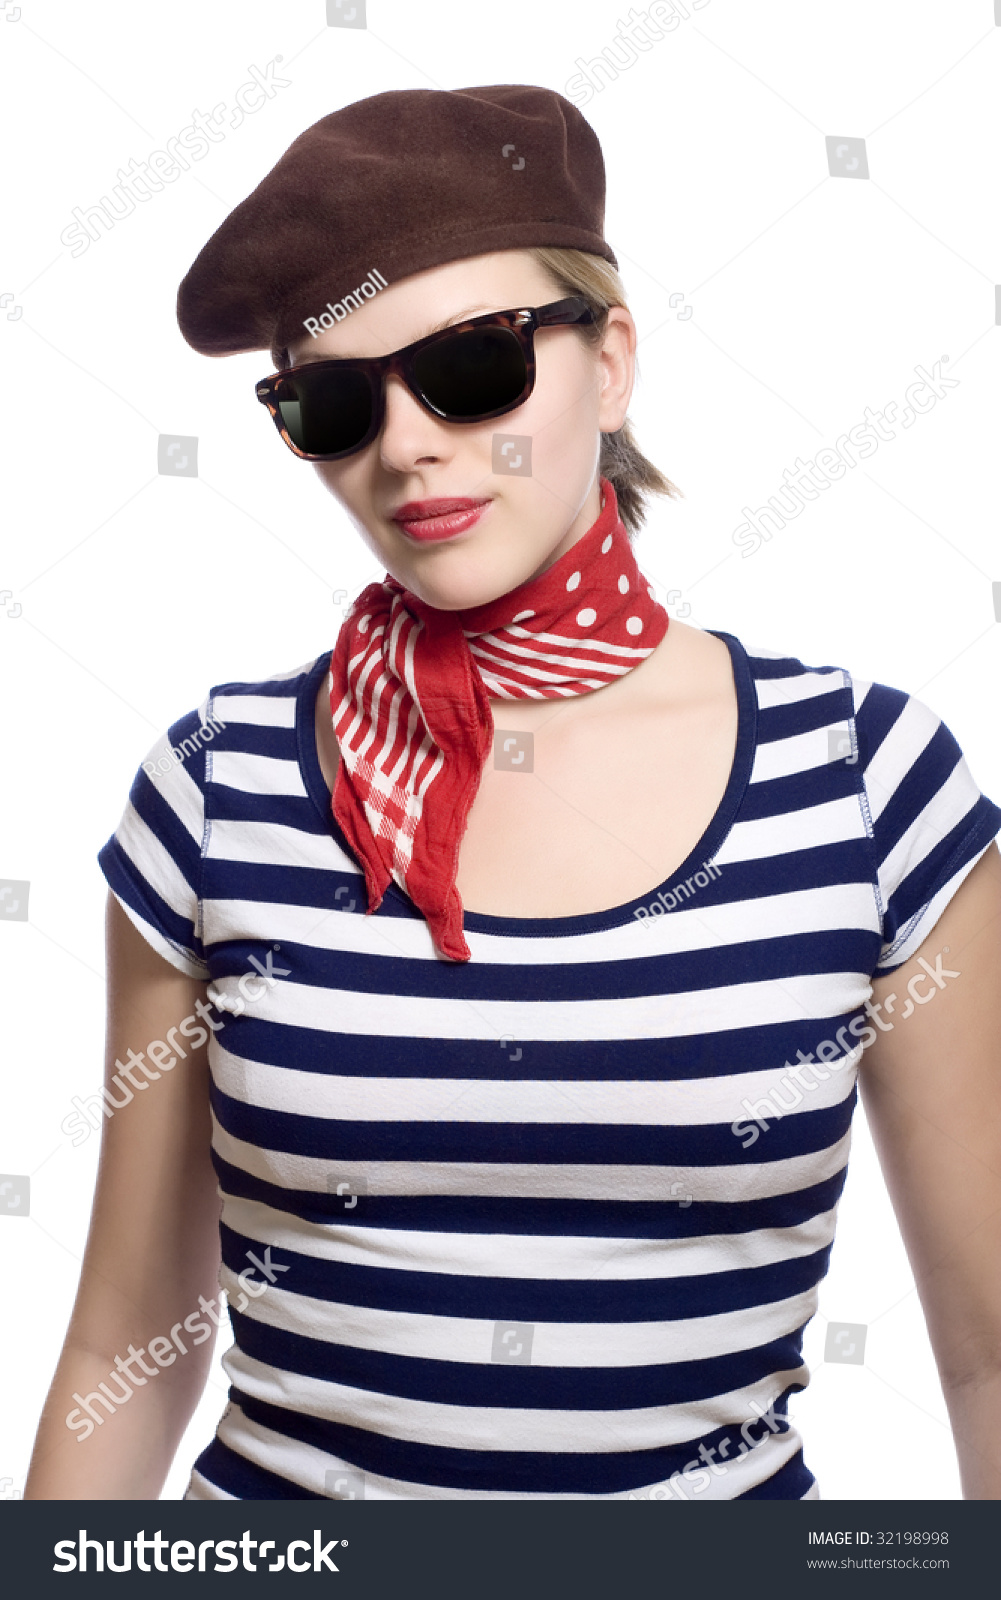 Beautiful Girl With Red Bandana Beret And Striped Shirt In A Classic 60s French Look Stock 